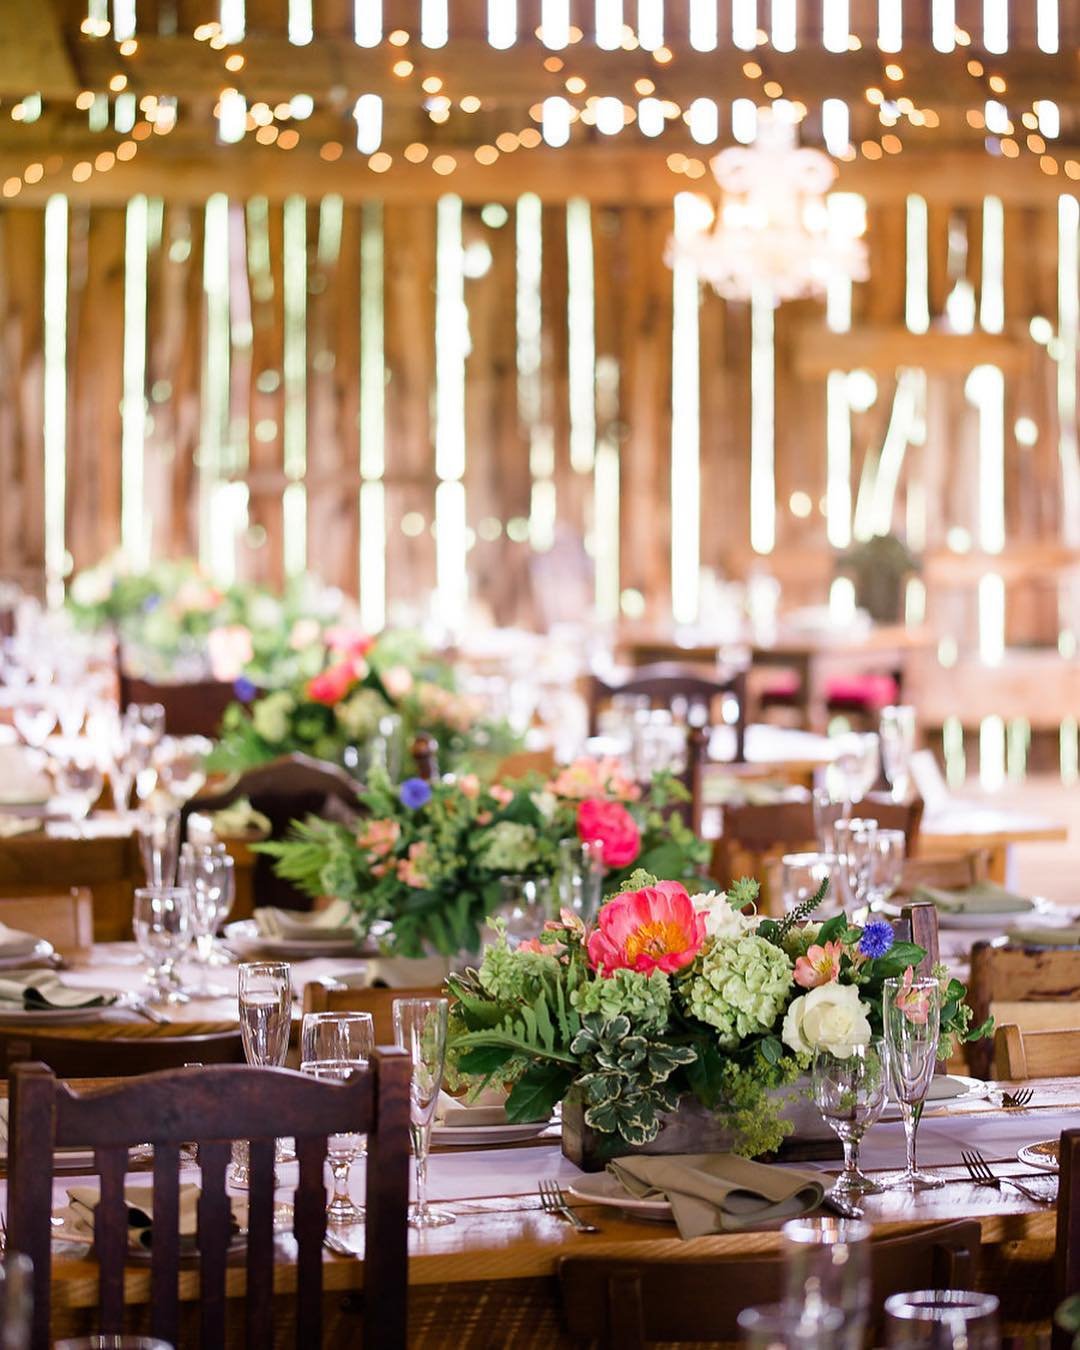 Centerpieces for a Barn Wedding from Fox Hill Farm in Honesdale PA.jpg